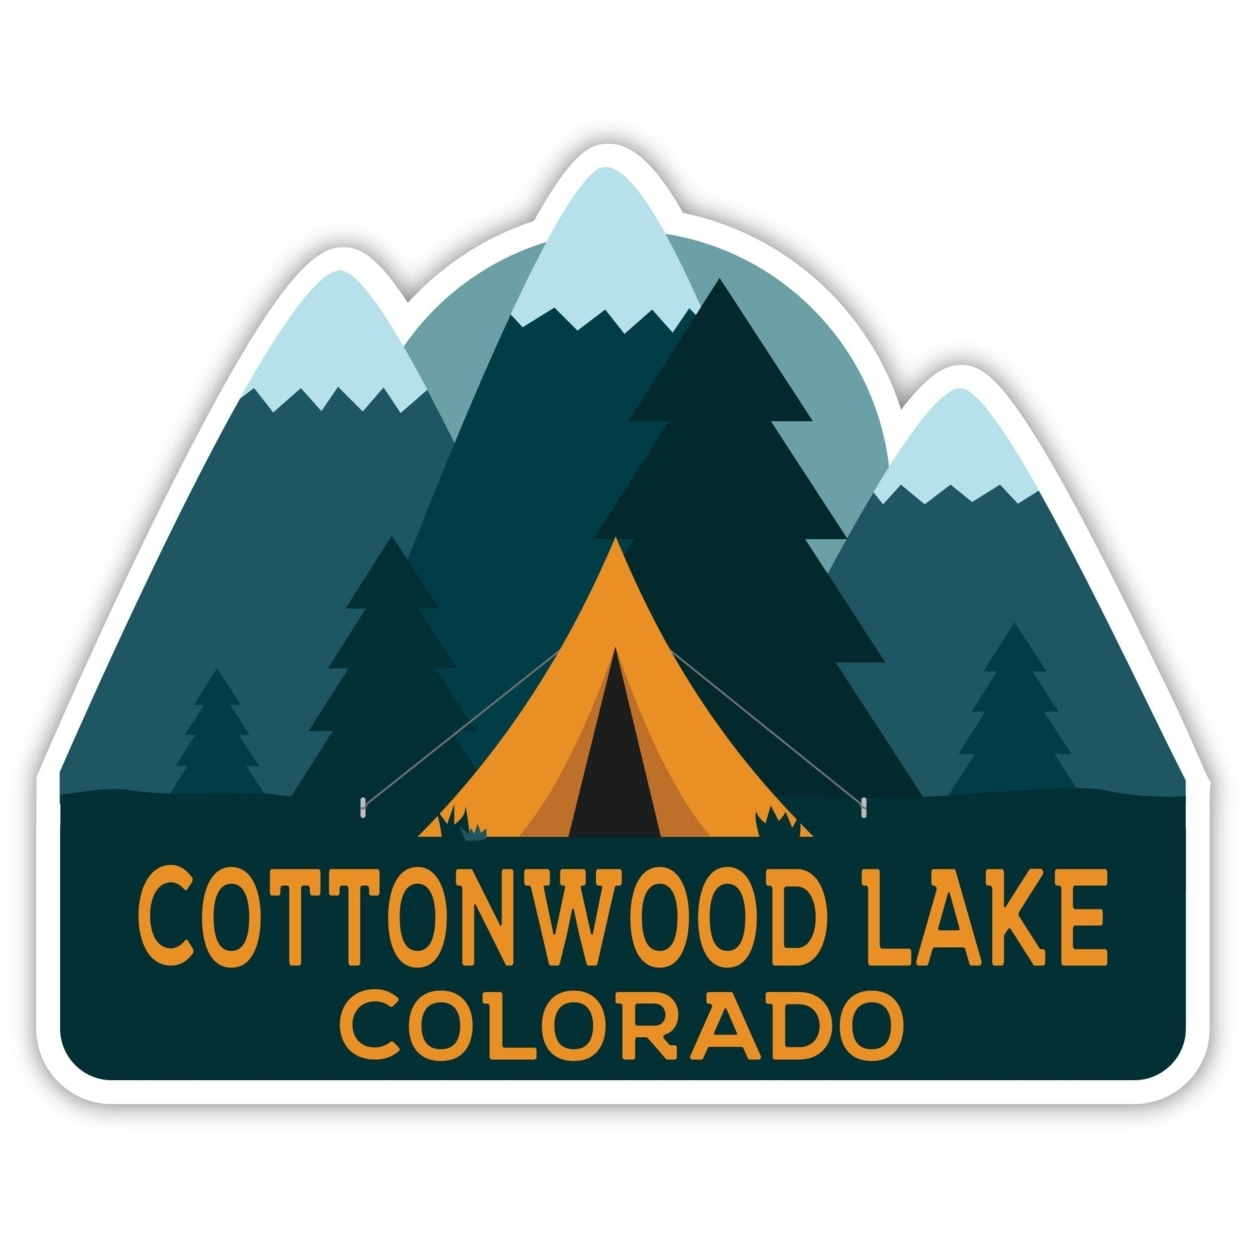 Cottonwood Lake Colorado Souvenir Decorative Stickers (Choose Theme And Size) - 4-Pack, 2-Inch, Tent